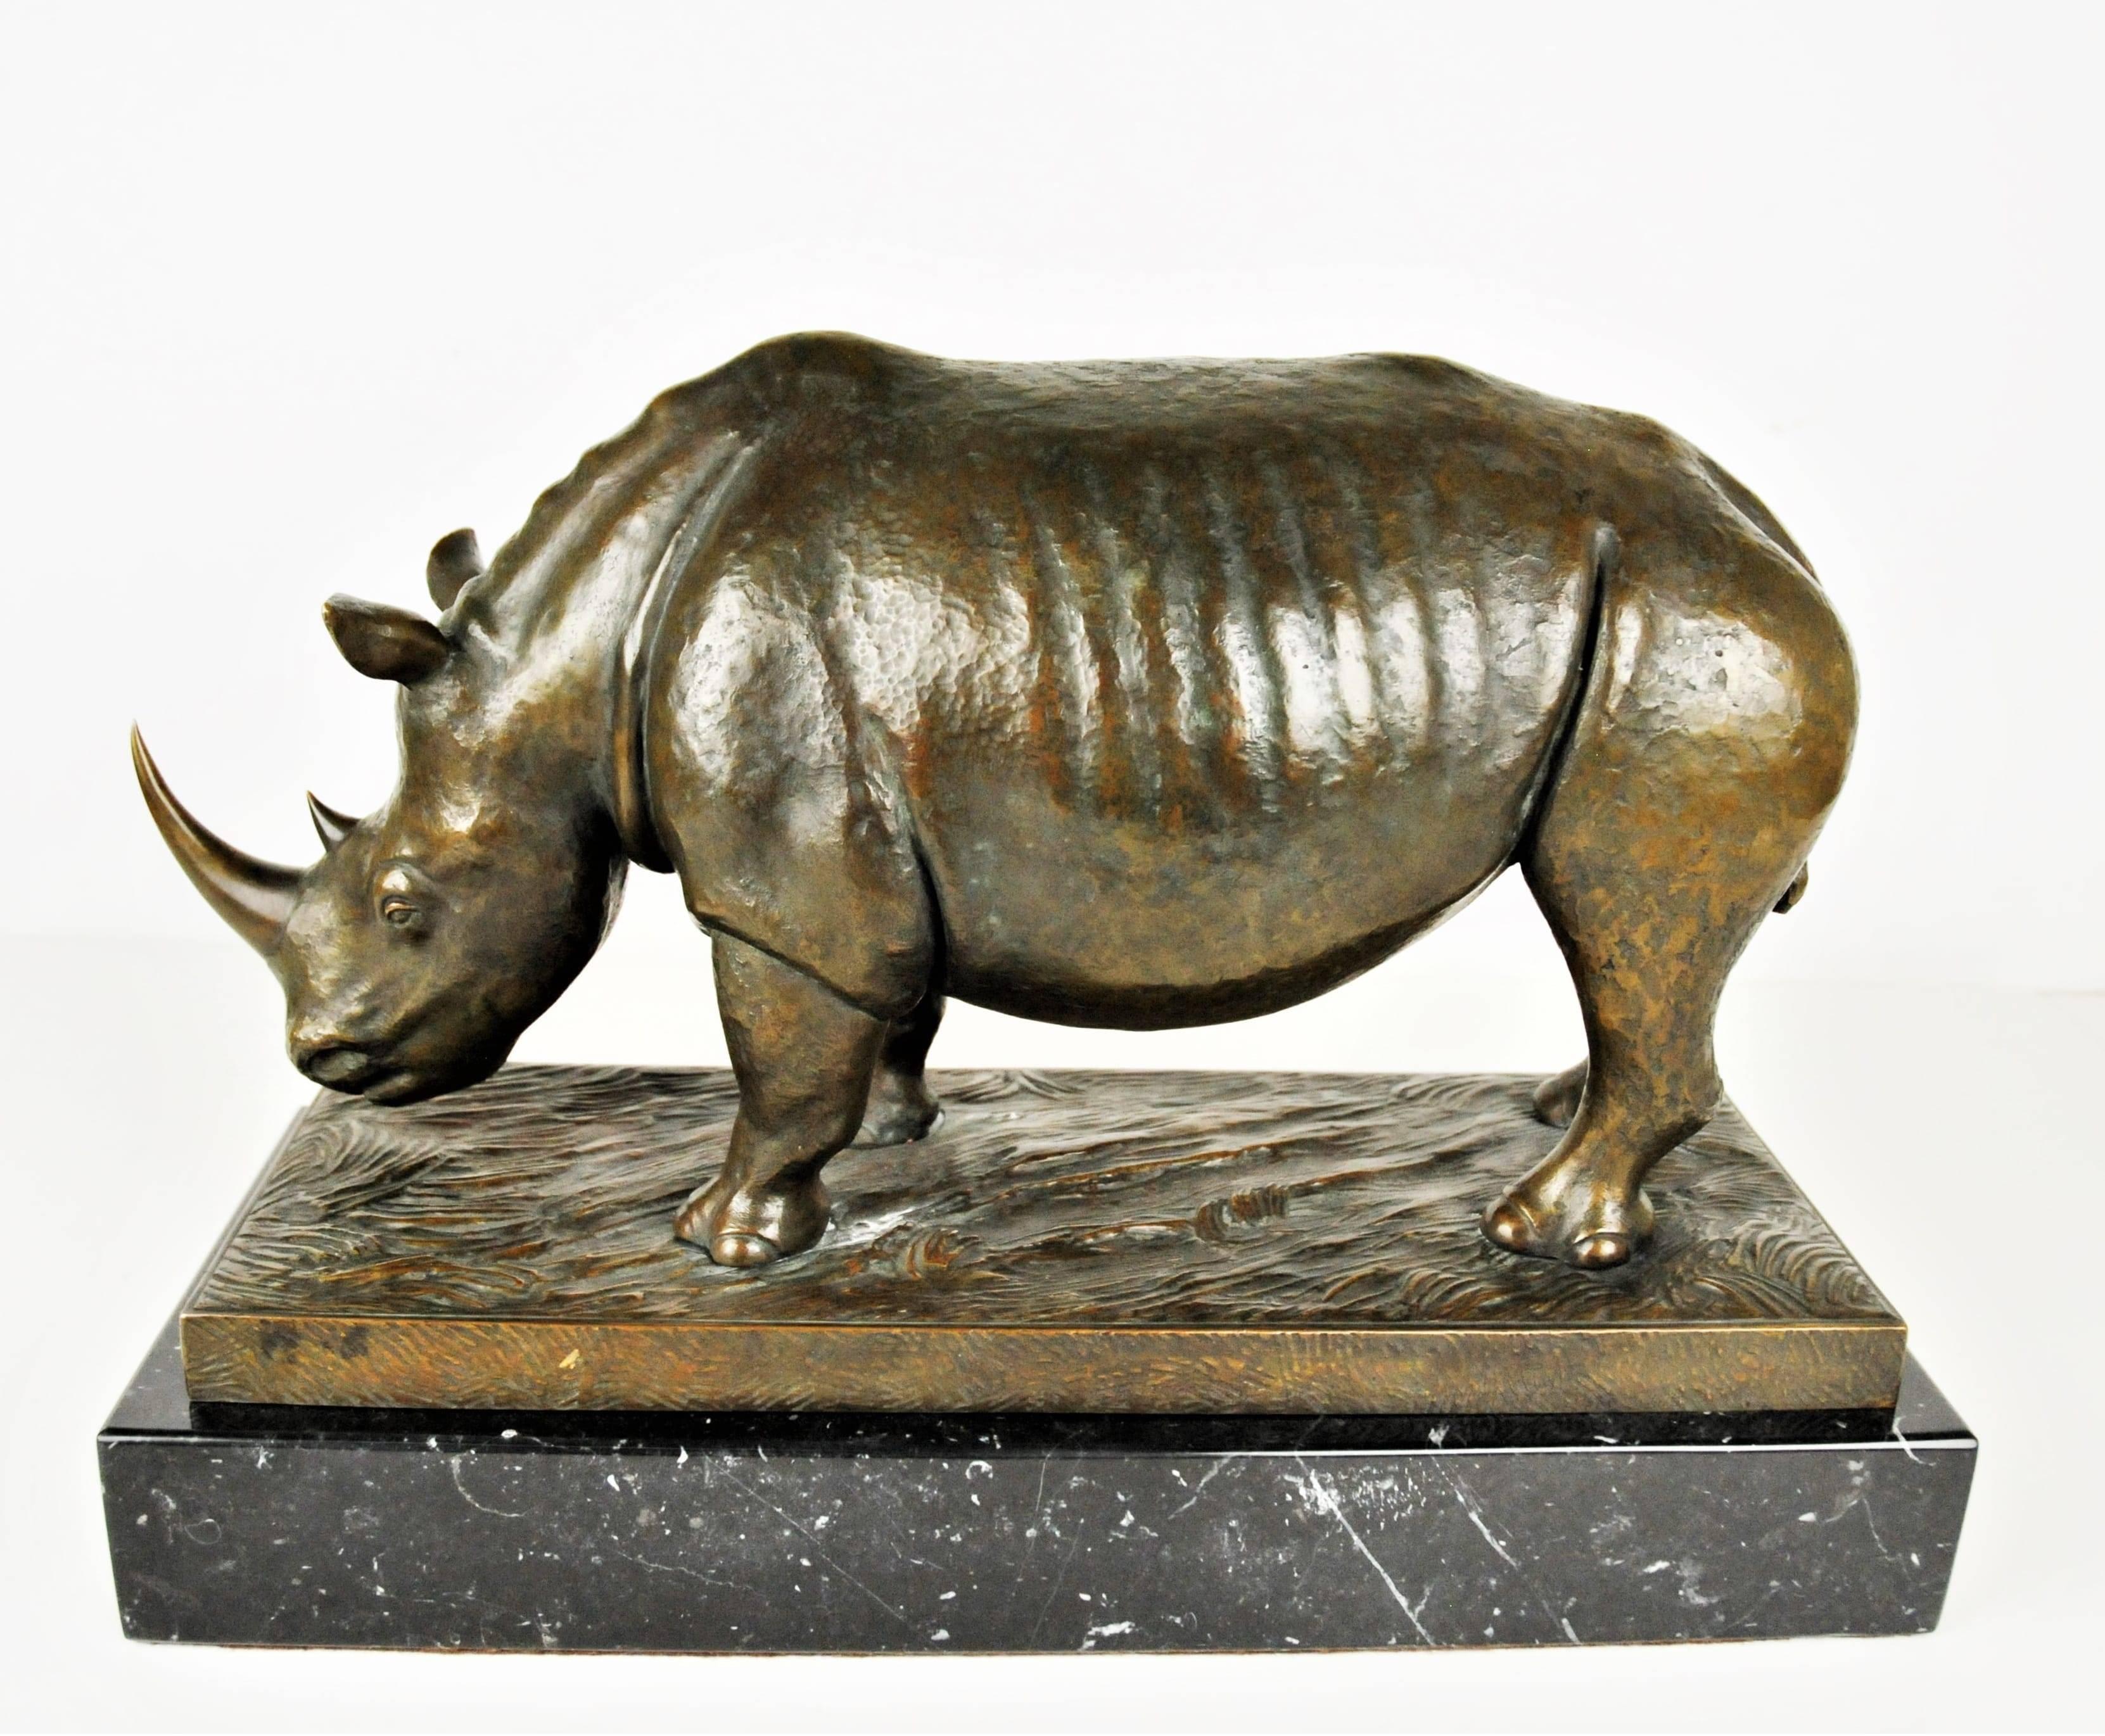 Paul Rudin (1904-1992) was an American sculptor, mostly known for animal depictions.